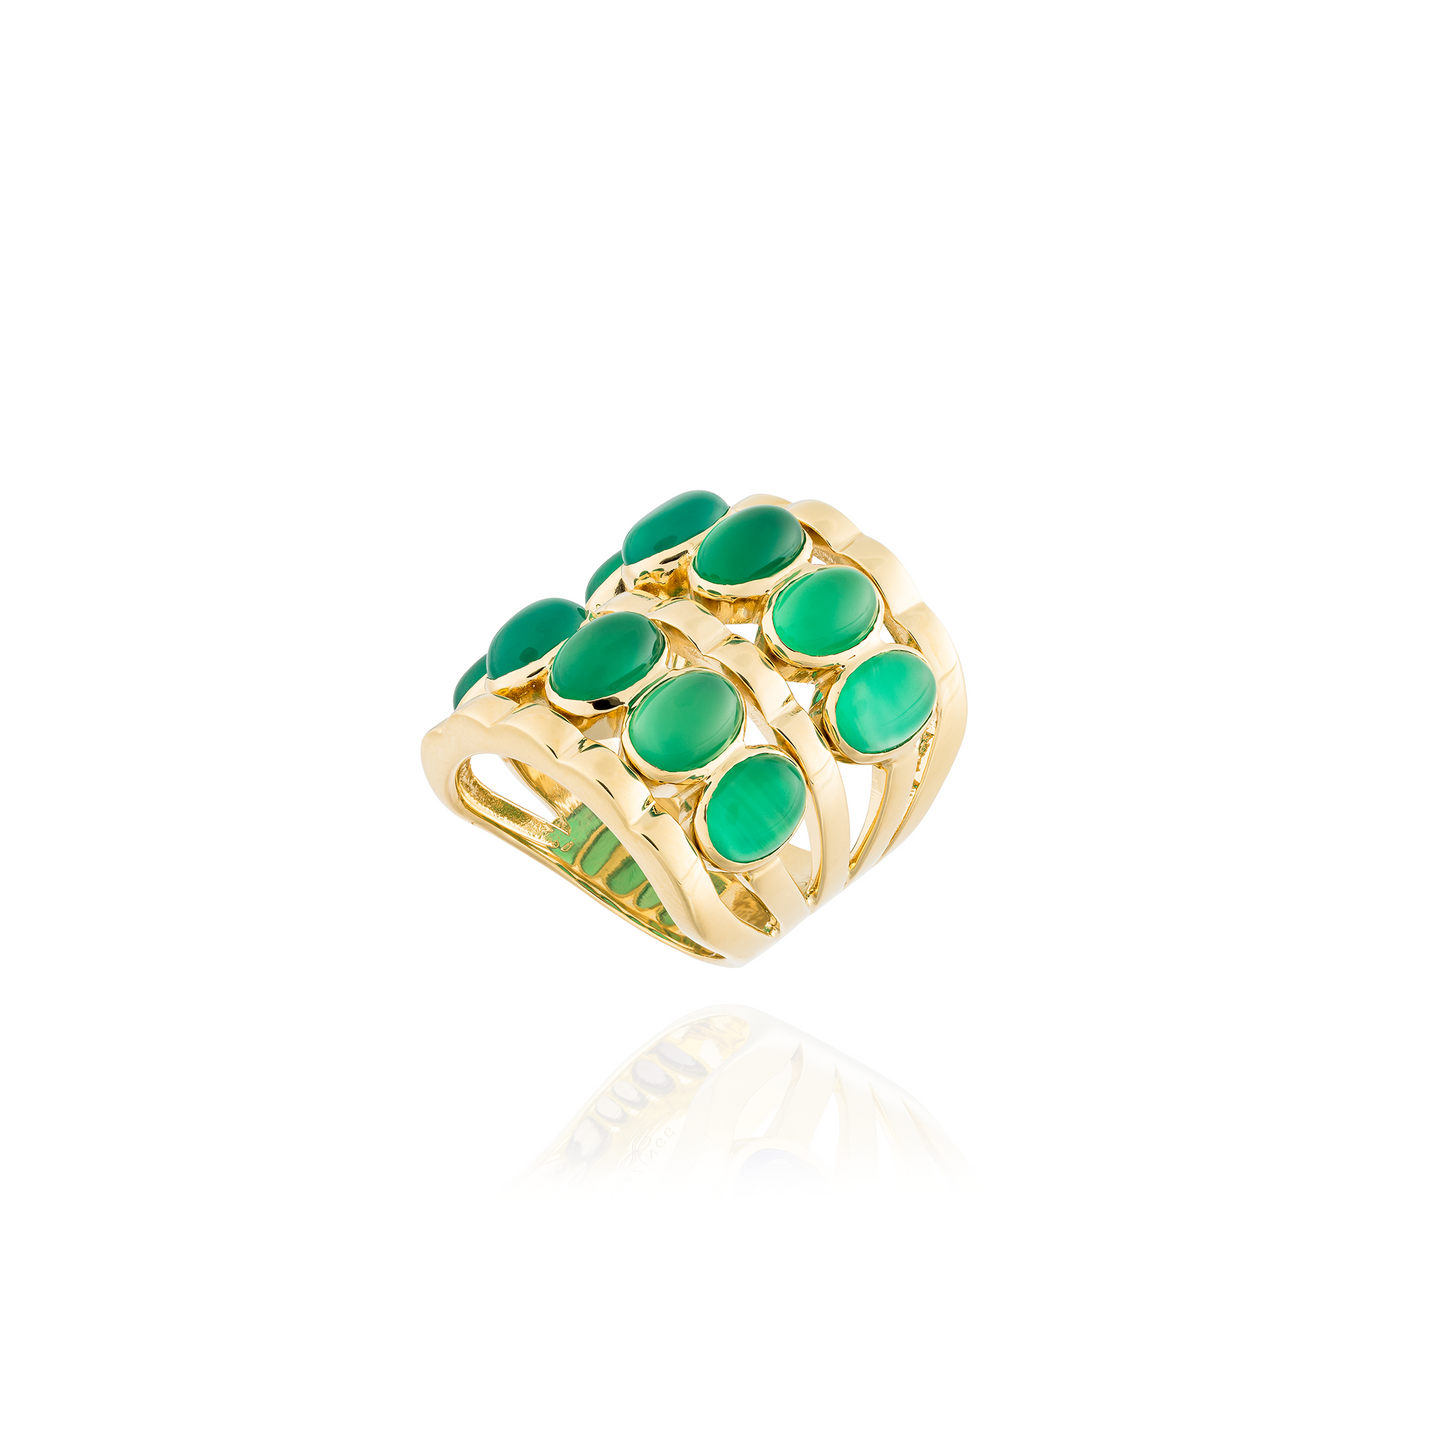 925 Silver Ring Plated in 18K Yellow Gold with Green Onyx   Cabouchon